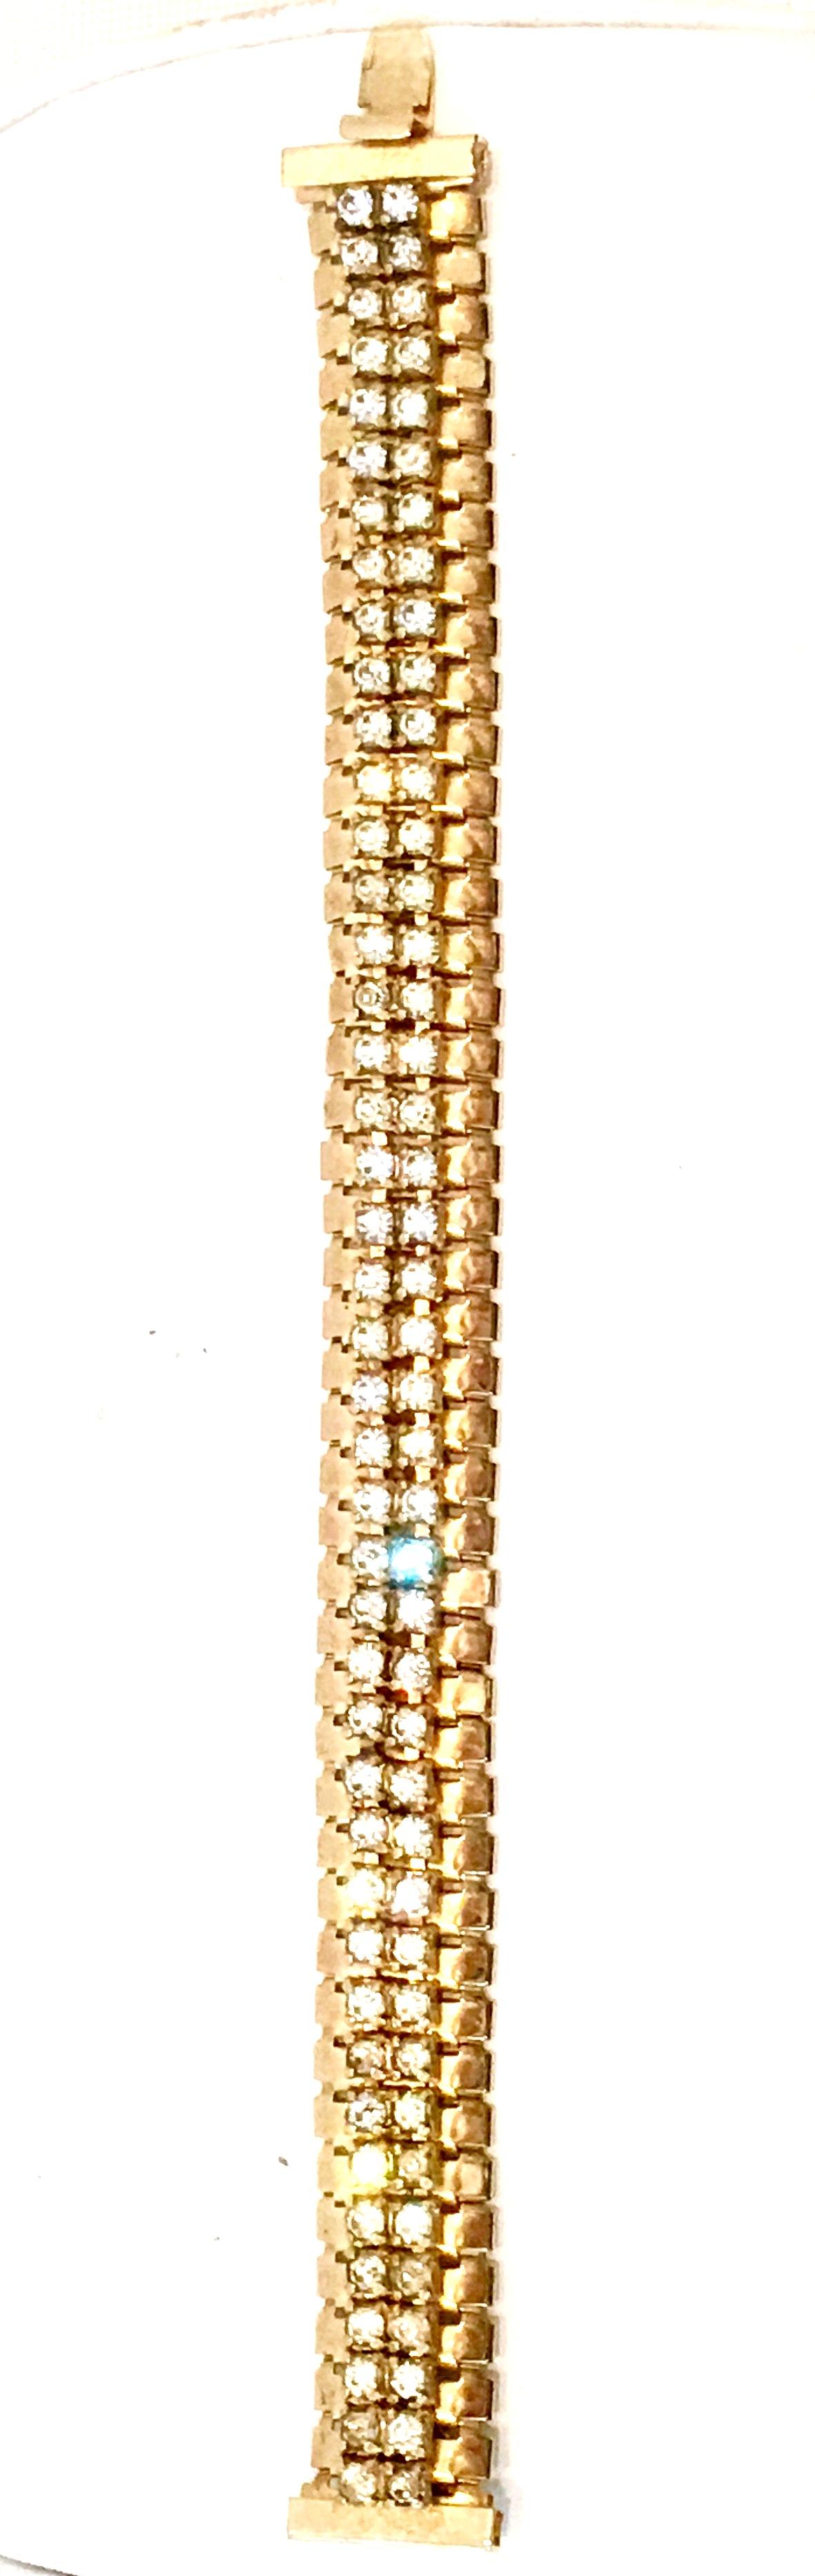 1950'S Gold Link & Swarovski Crystal Rhinestone Bracelet By, Jewels By Julio In Excellent Condition For Sale In West Palm Beach, FL